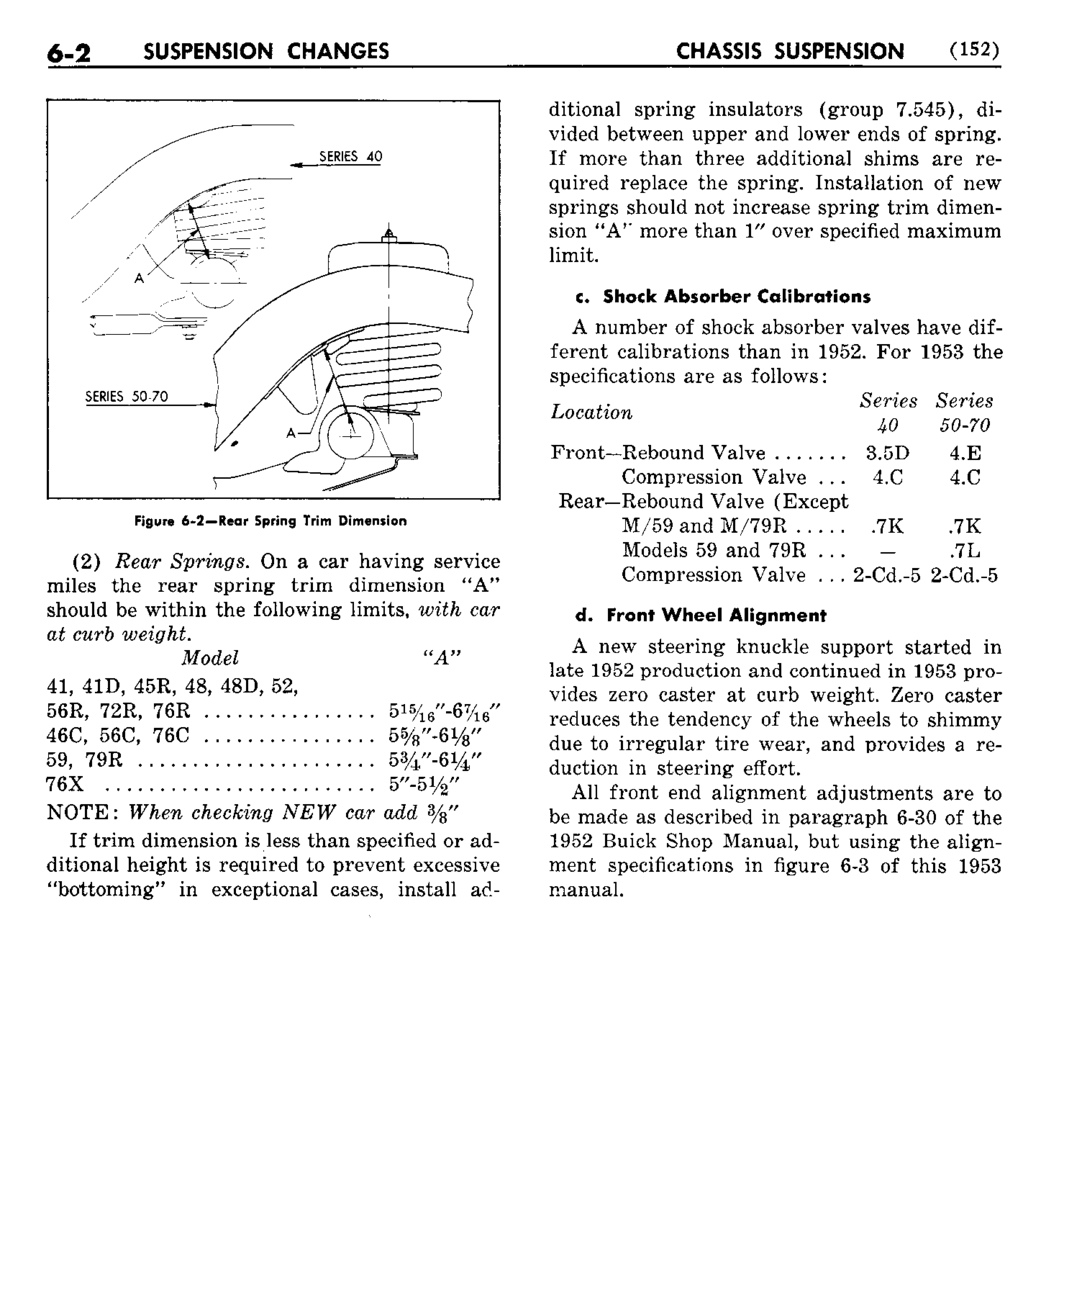 n_07 1953 Buick Shop Manual - Chassis Suspension-002-002.jpg